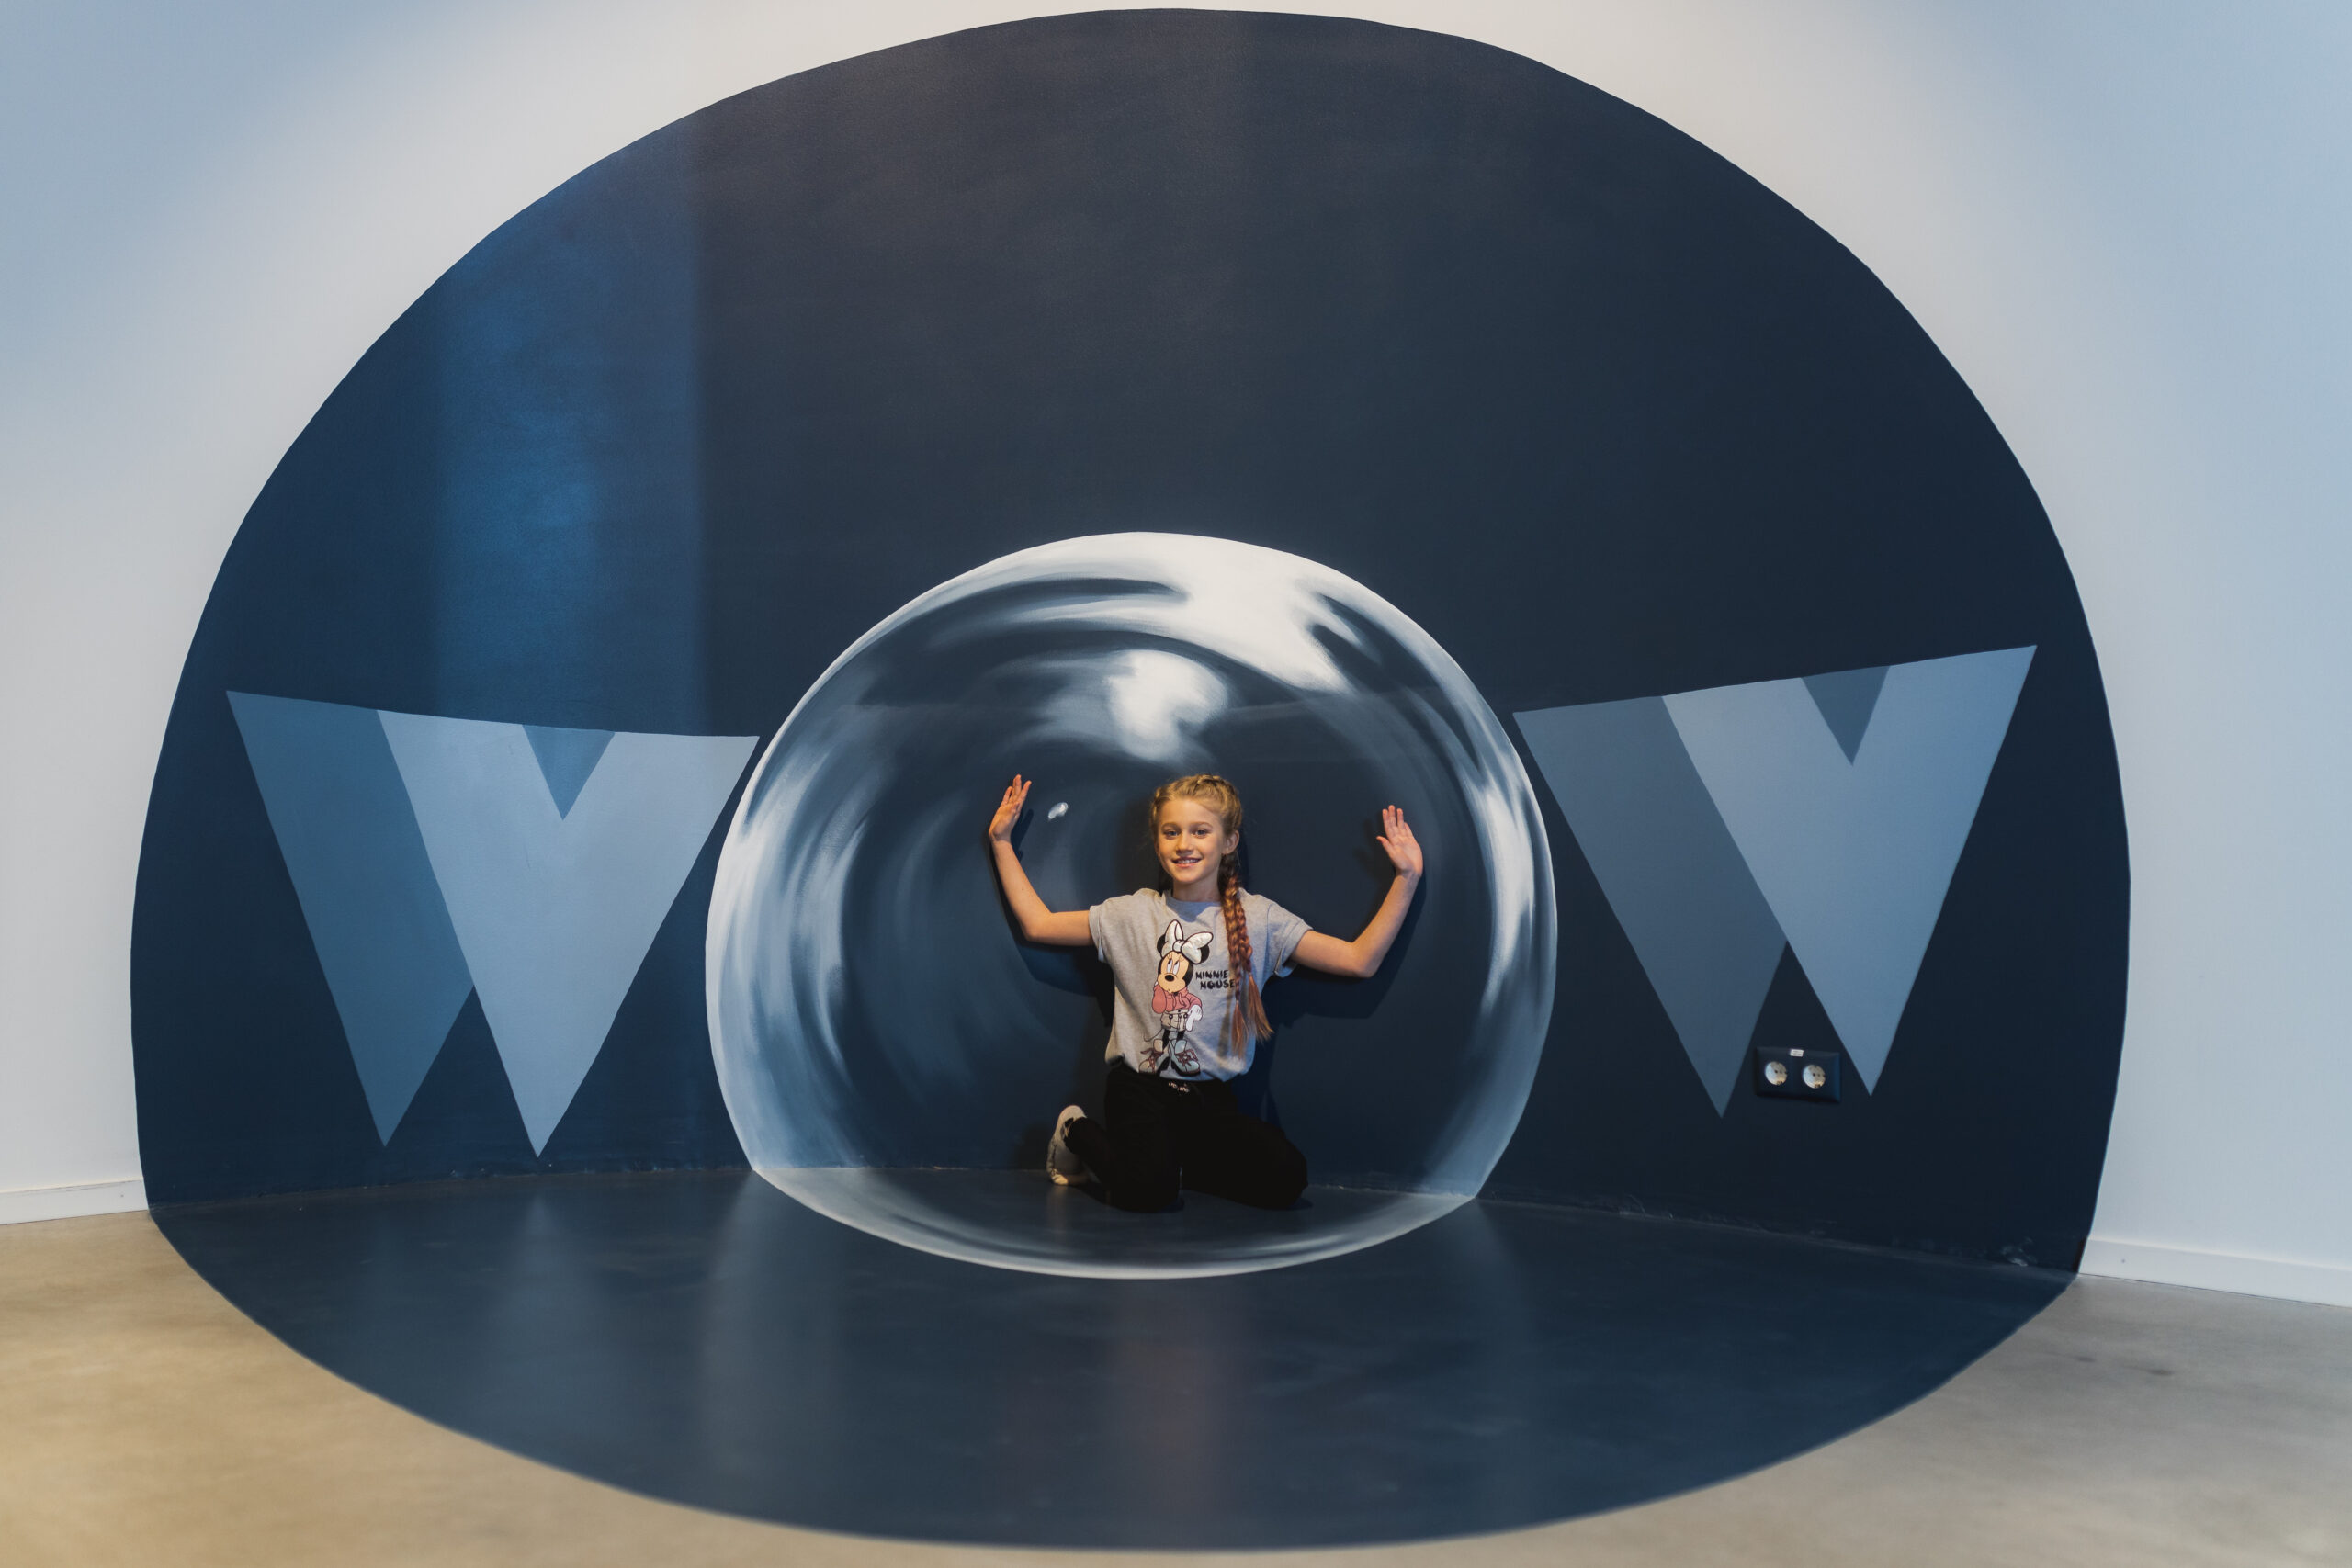 Photo: WOW Experience Centre